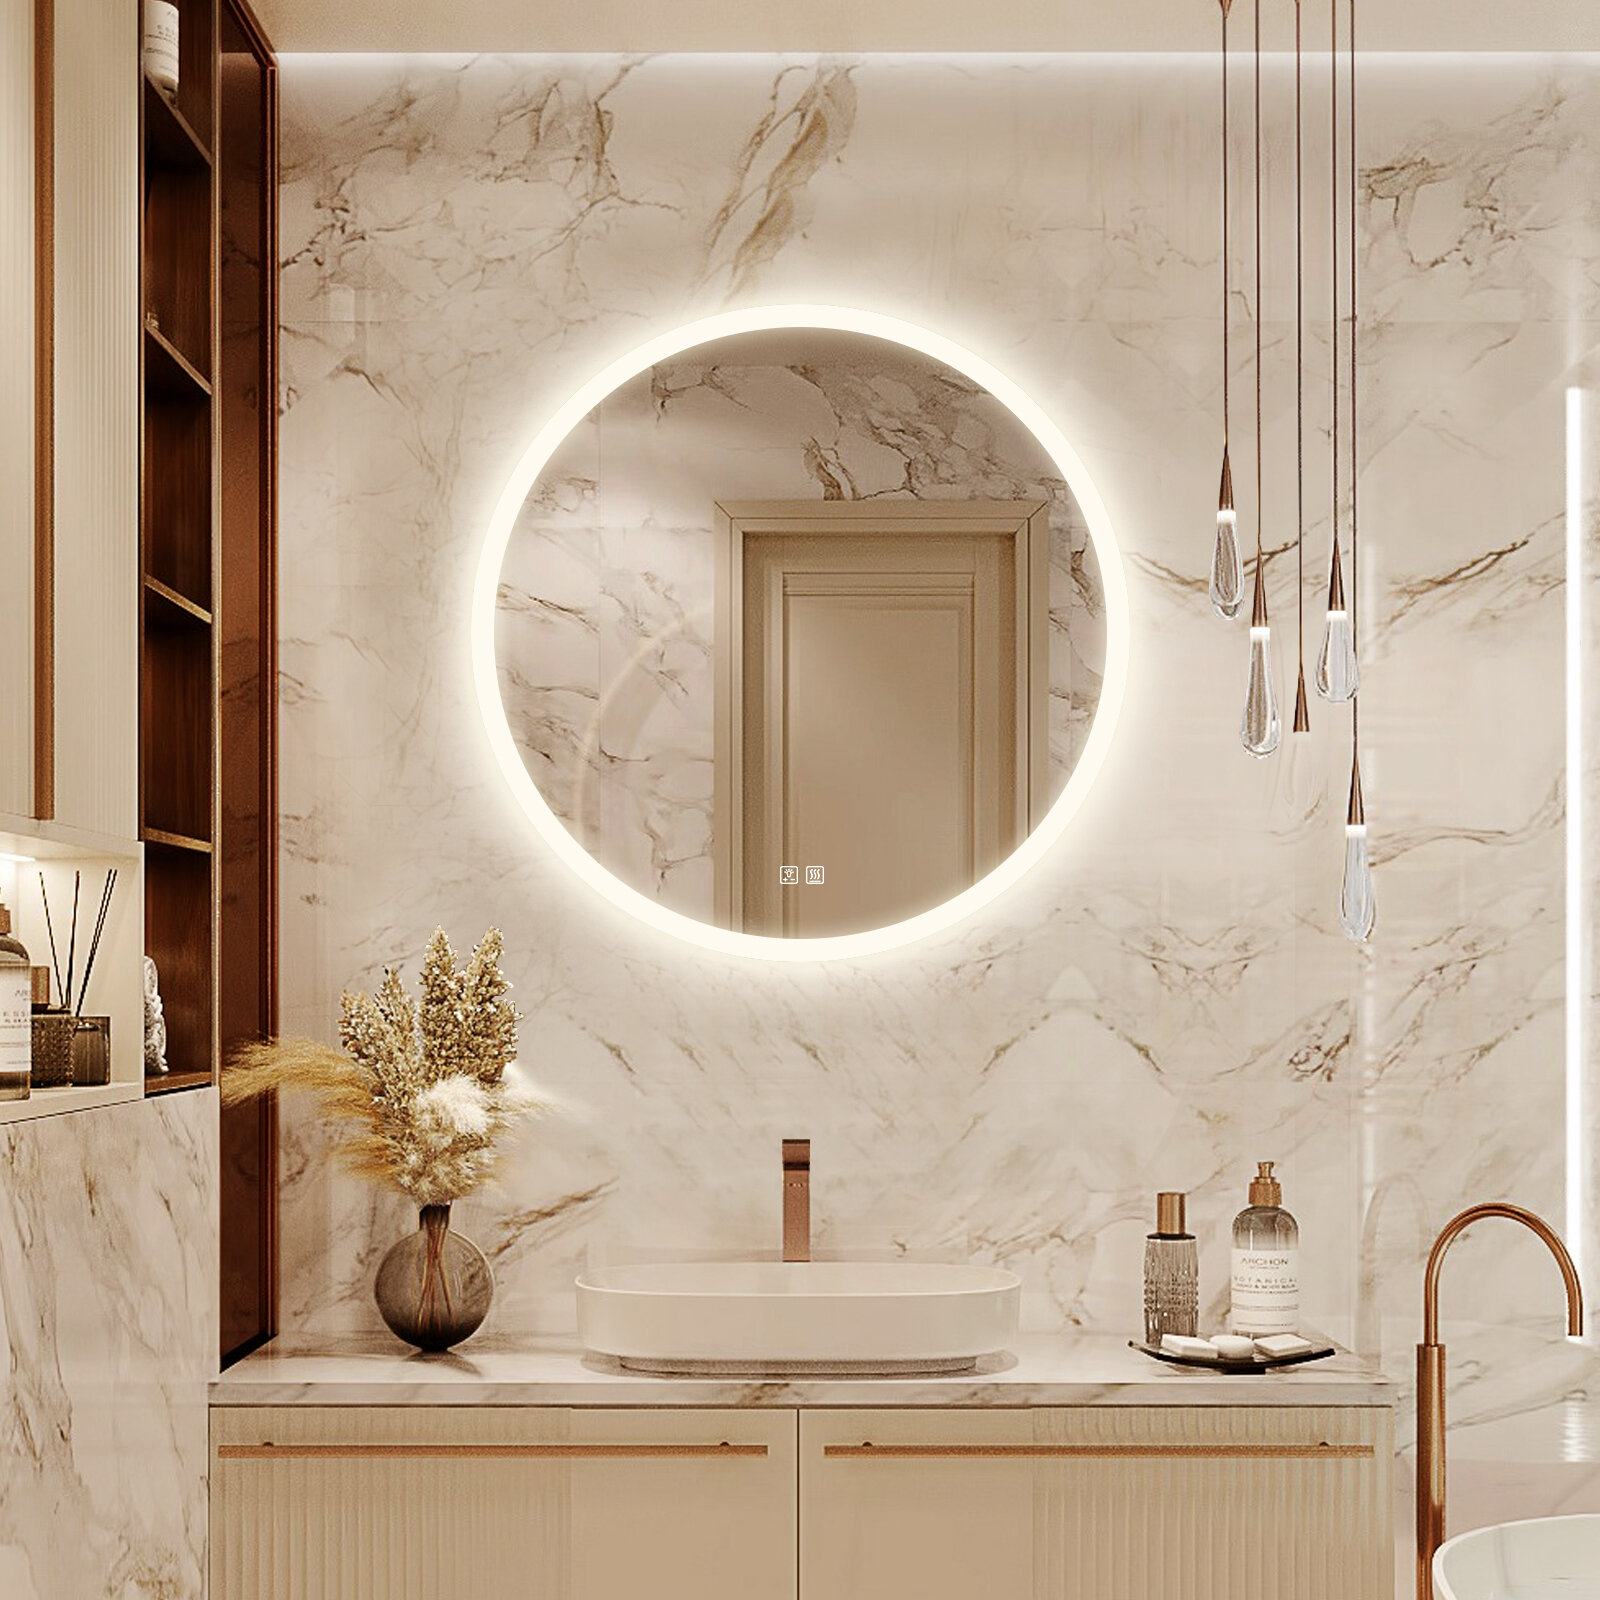 Round Energy Saving Copper-Free Silver LED Lighted Bathroom / Vanity Mirror, Anti-Fog, Dimmable Orren Ellis Size: 40 x 40